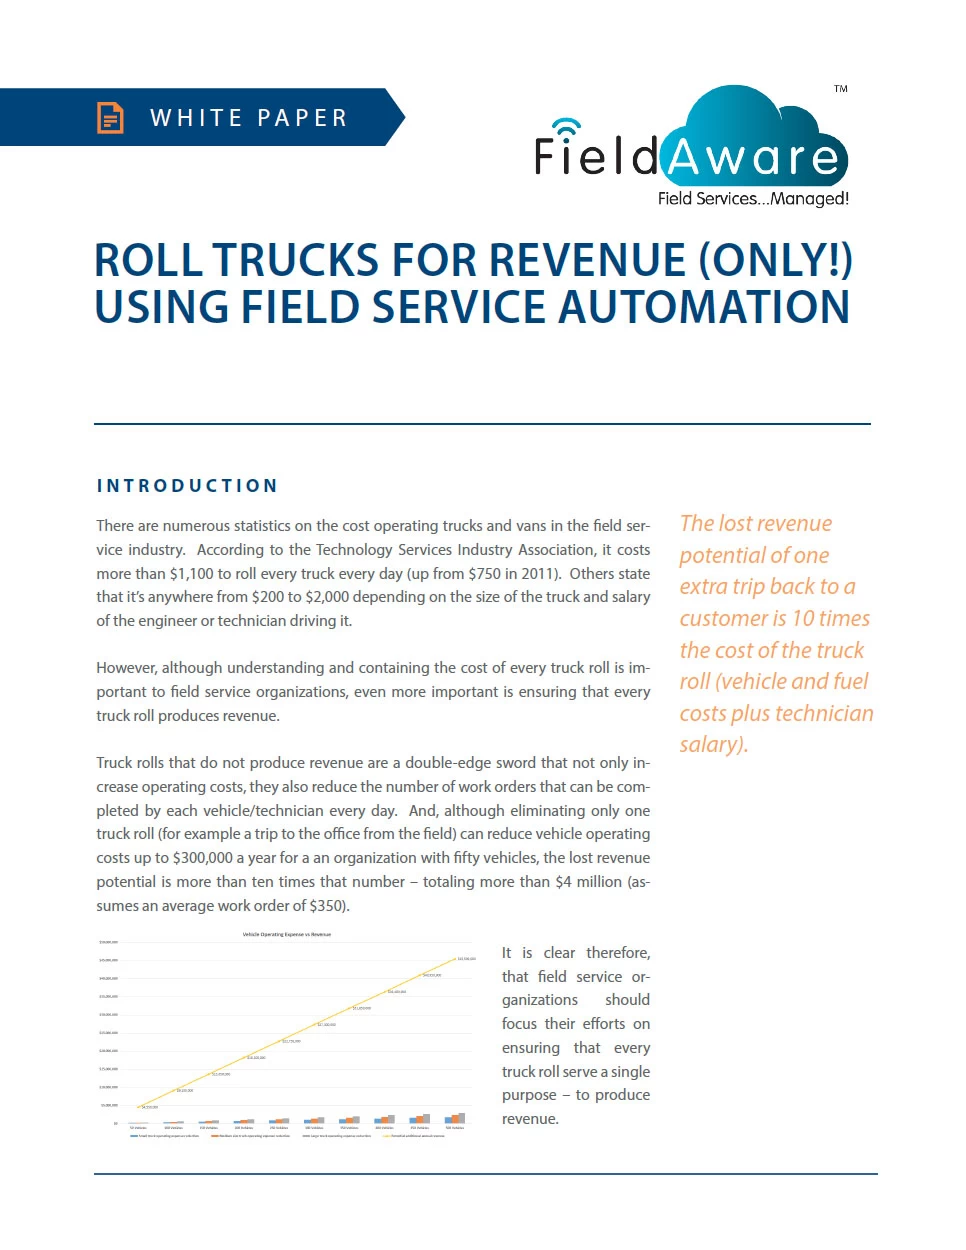 Roll Trucks For Revenue (Only!) Using Field Service Automation White Paper